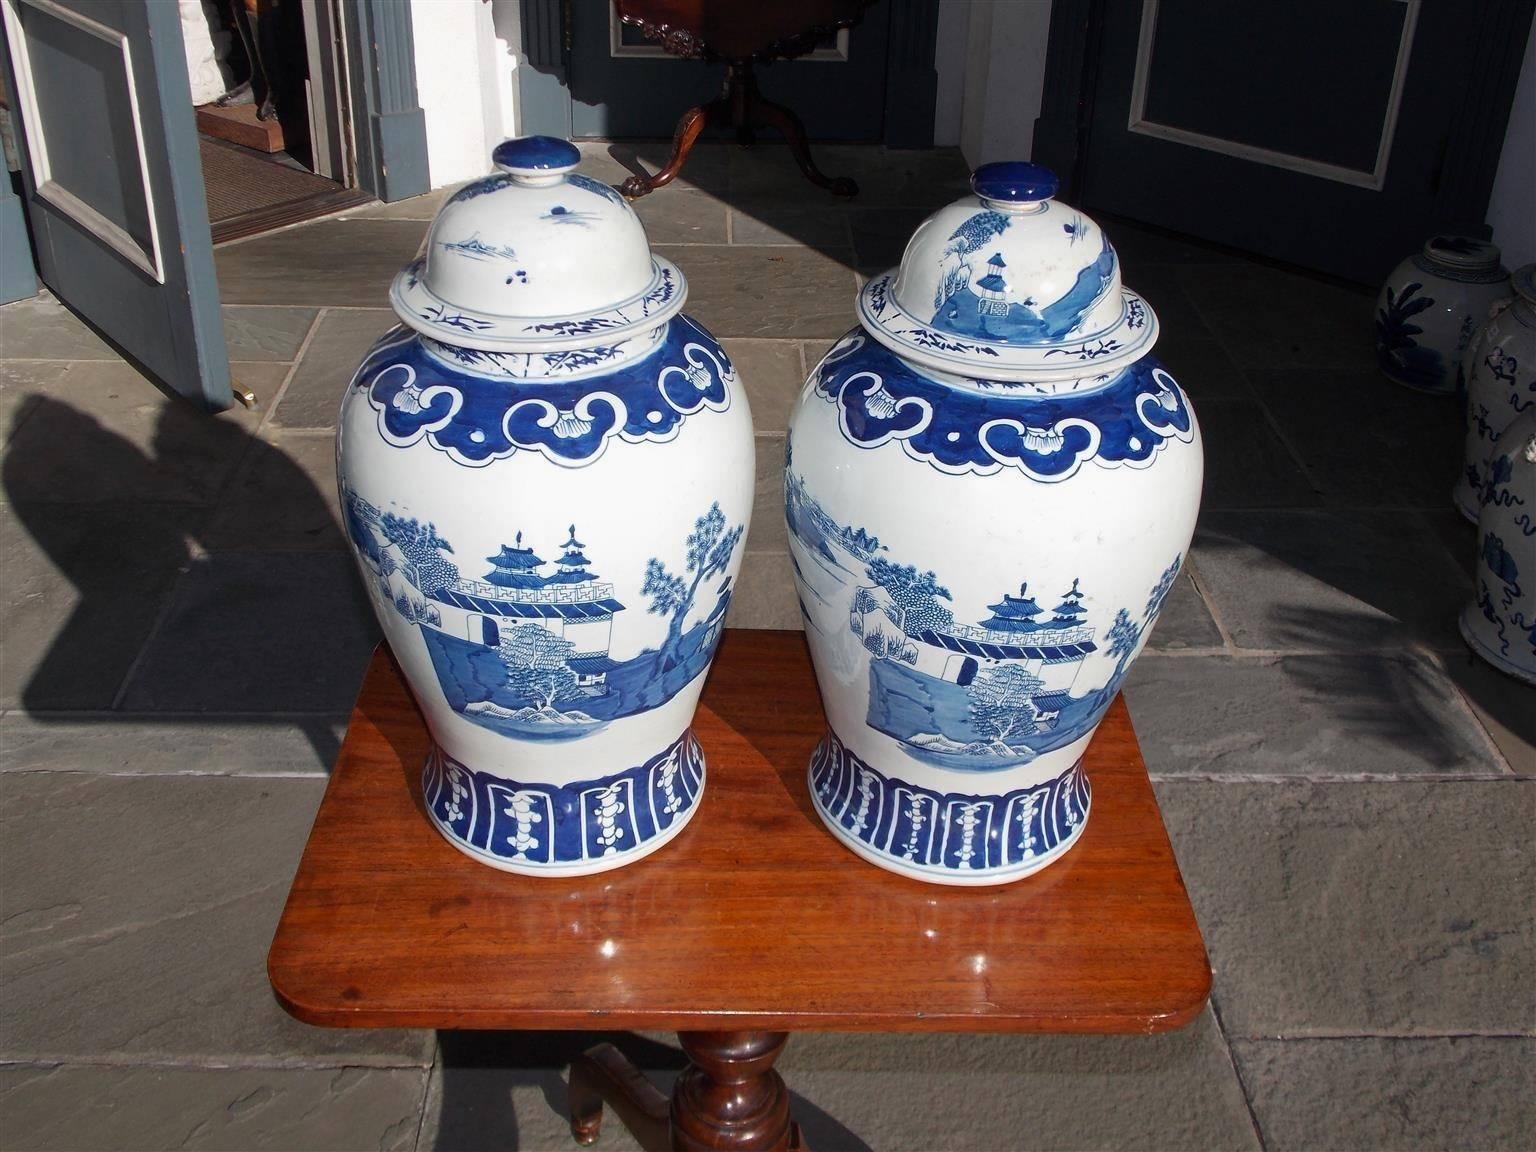 Pair of Chinese porcelain glazed blue and white temple jars with hand-painted decorative borders, trees, pagodas, landscapes, and running stream scenes. Lids are removable and were used to store perishable goods, 20th century.